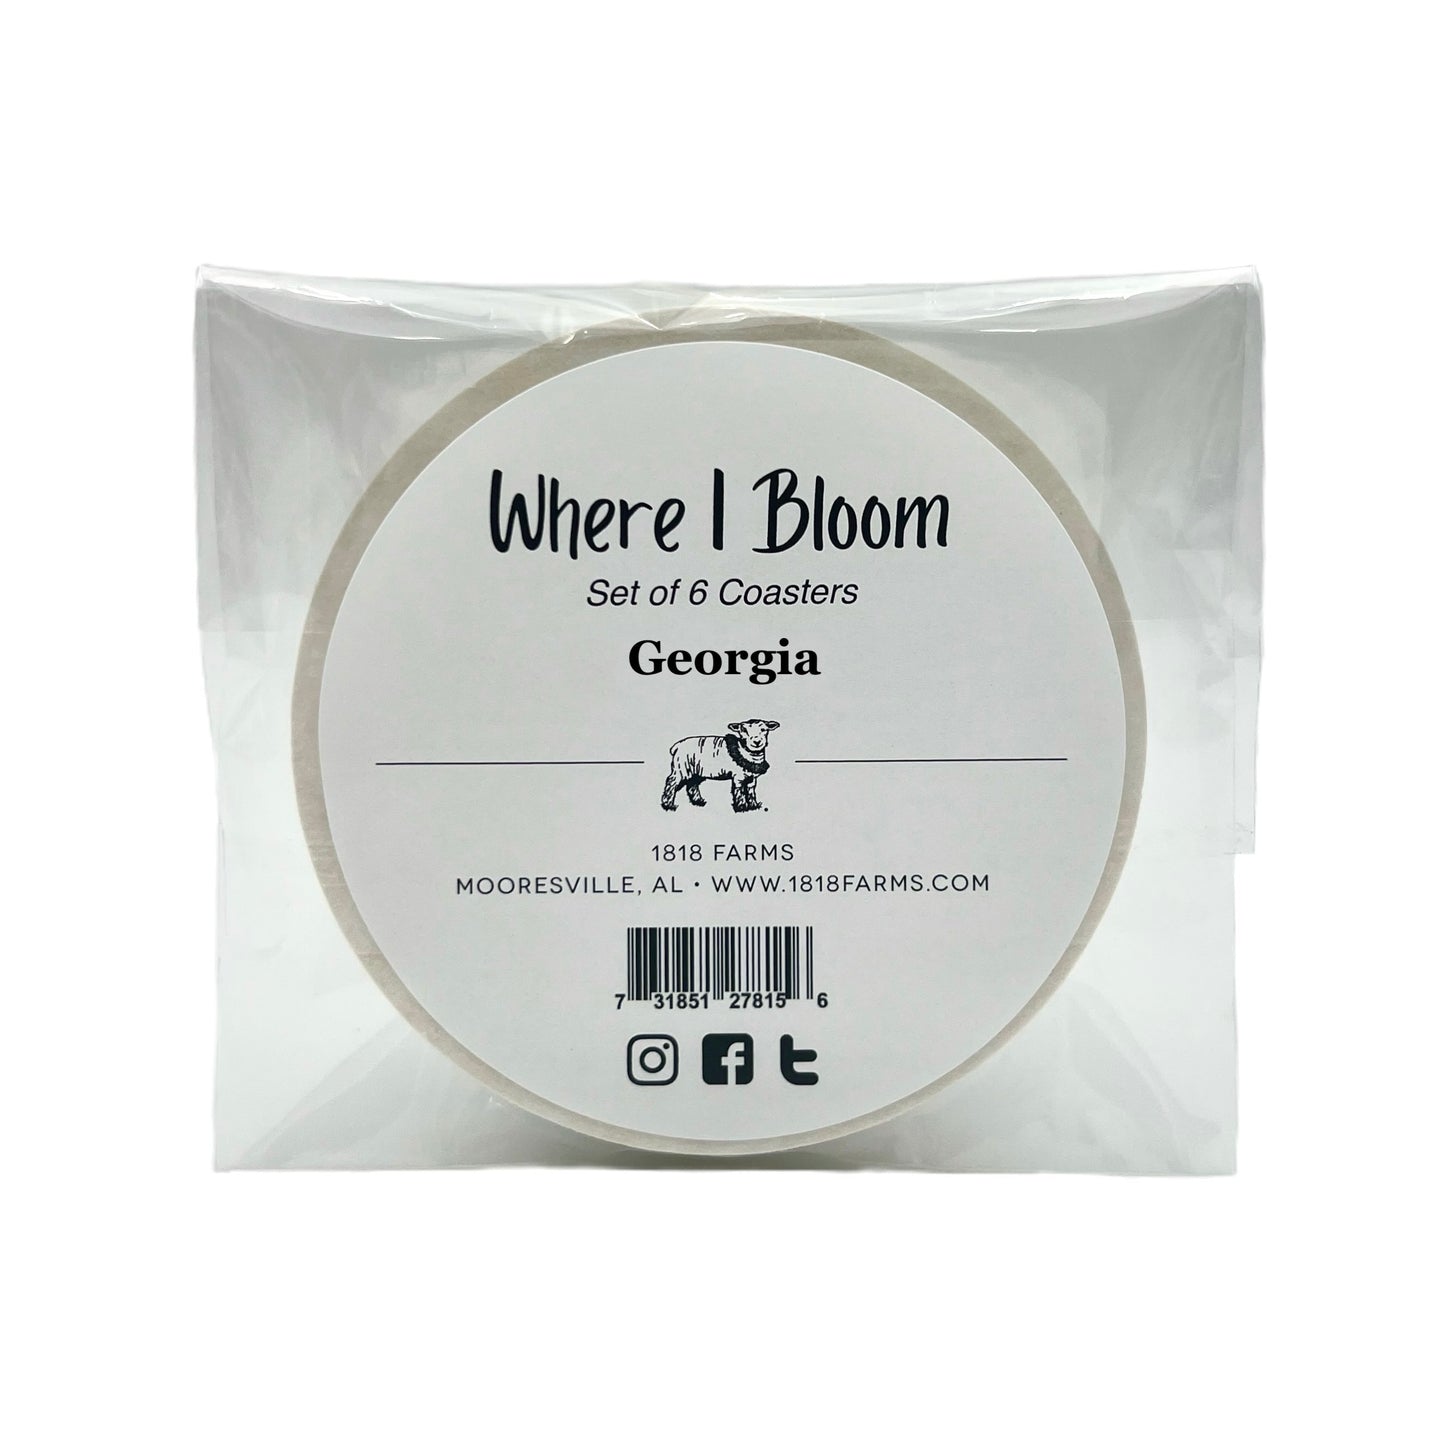 Georgia Themed Coasters (Set of 6) Featuring Dried, Pressed Flowers - "Where I Bloom" Collection Coaster 1818 Farms   